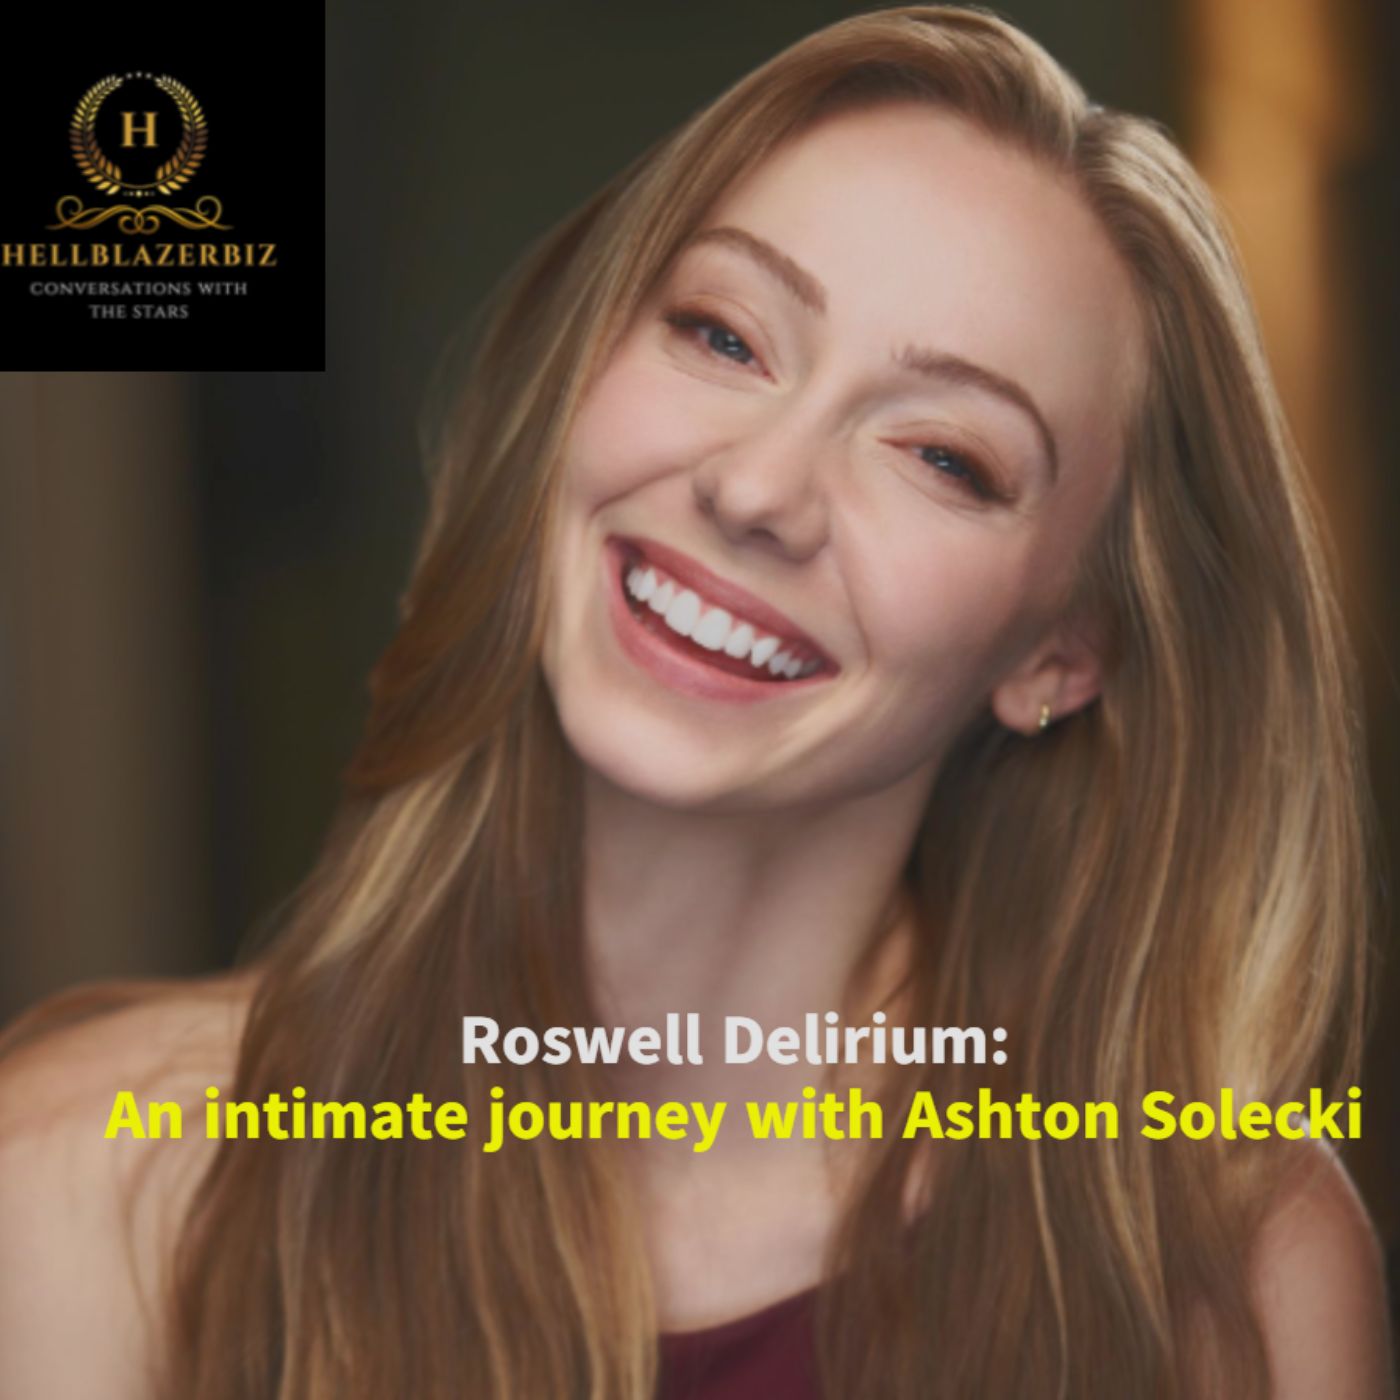 Roswell Delirium An Intimate Journey with Ashton Solecki